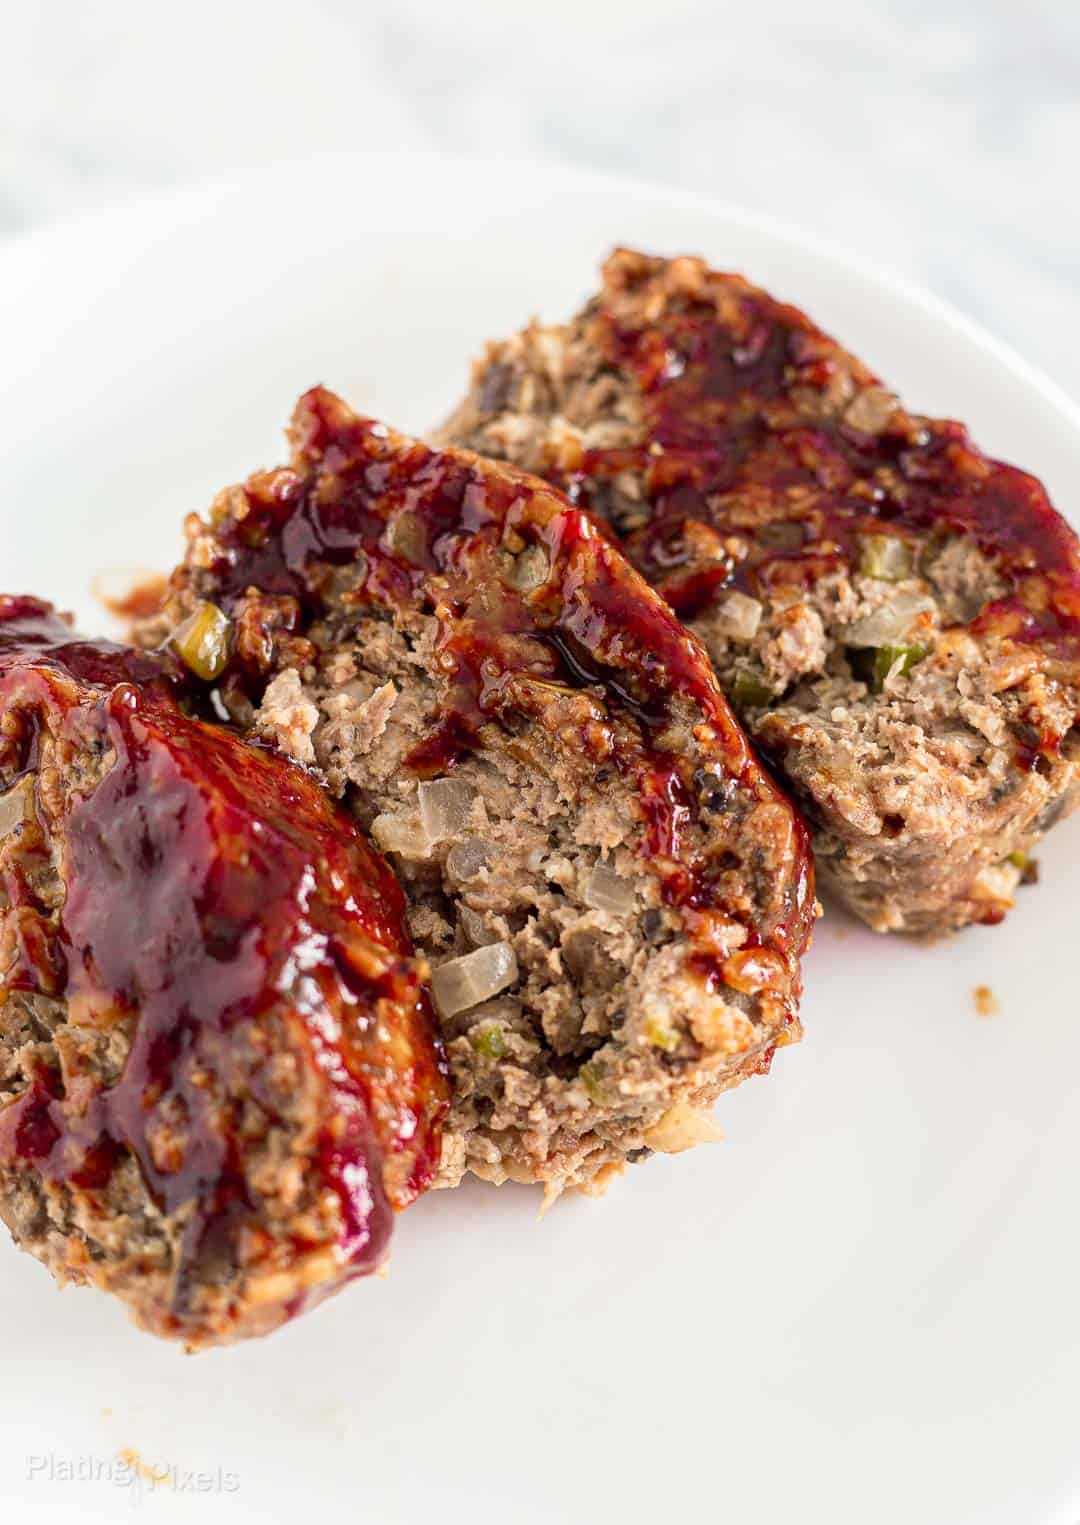 Three slices of meatloaf served on a white plate